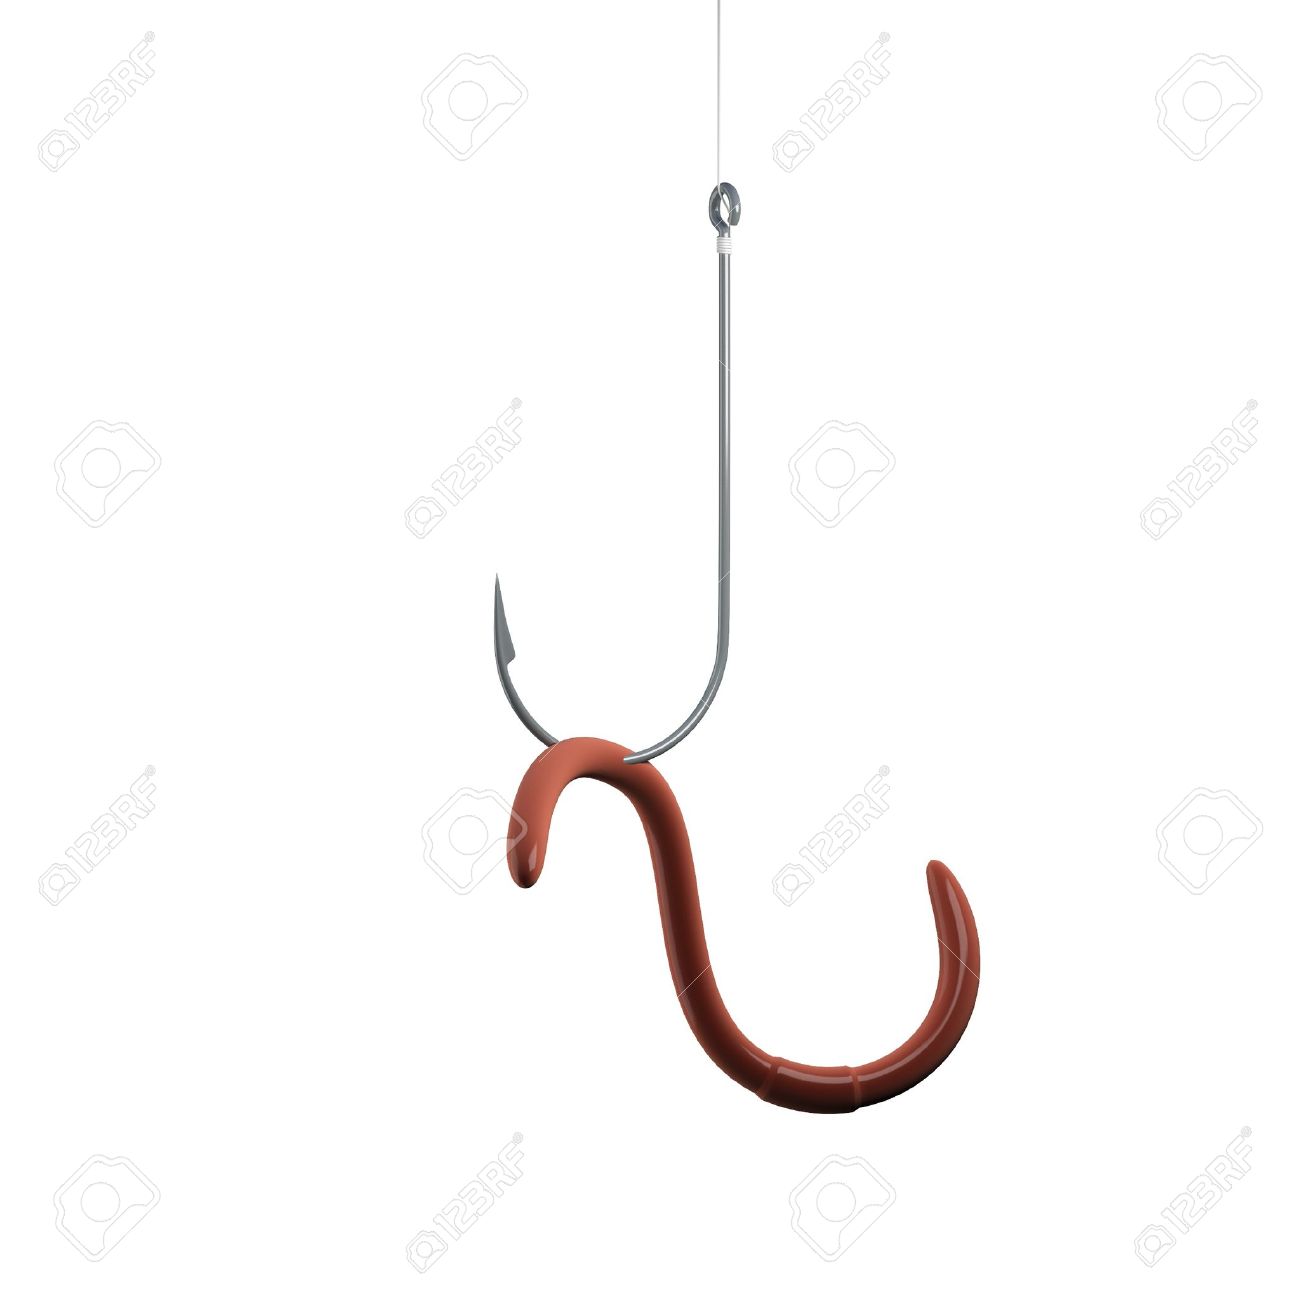 15495811-Worm-on-a-fishing-hook-isolated-at-white-background-Stock-Photo.jpg